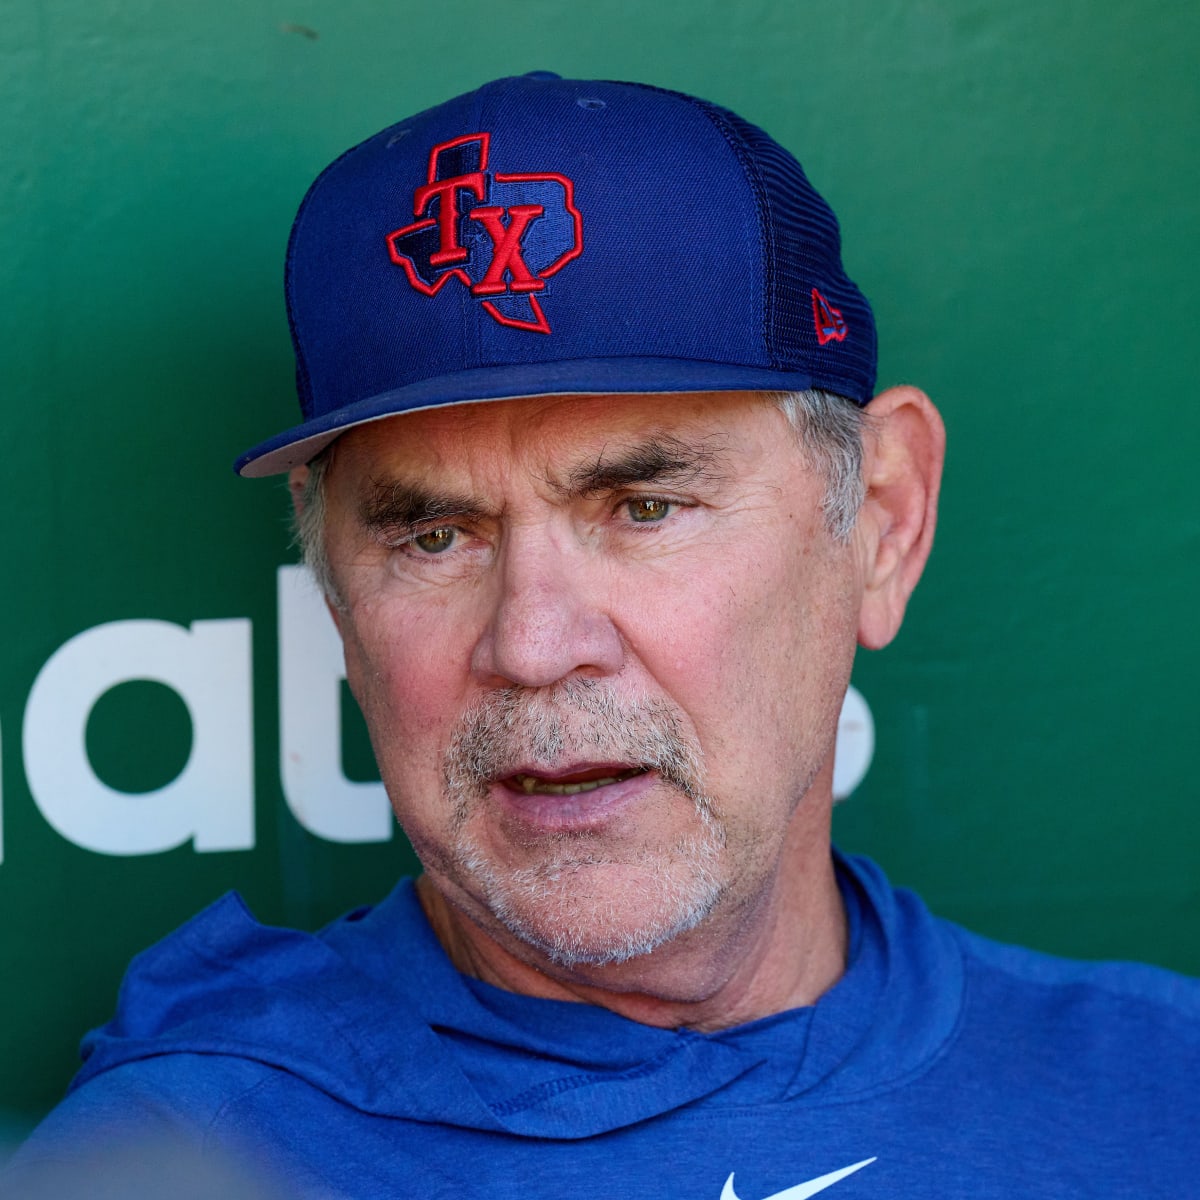 Rangers manager Bruce Bochy recalls 'tremendous time' with SF